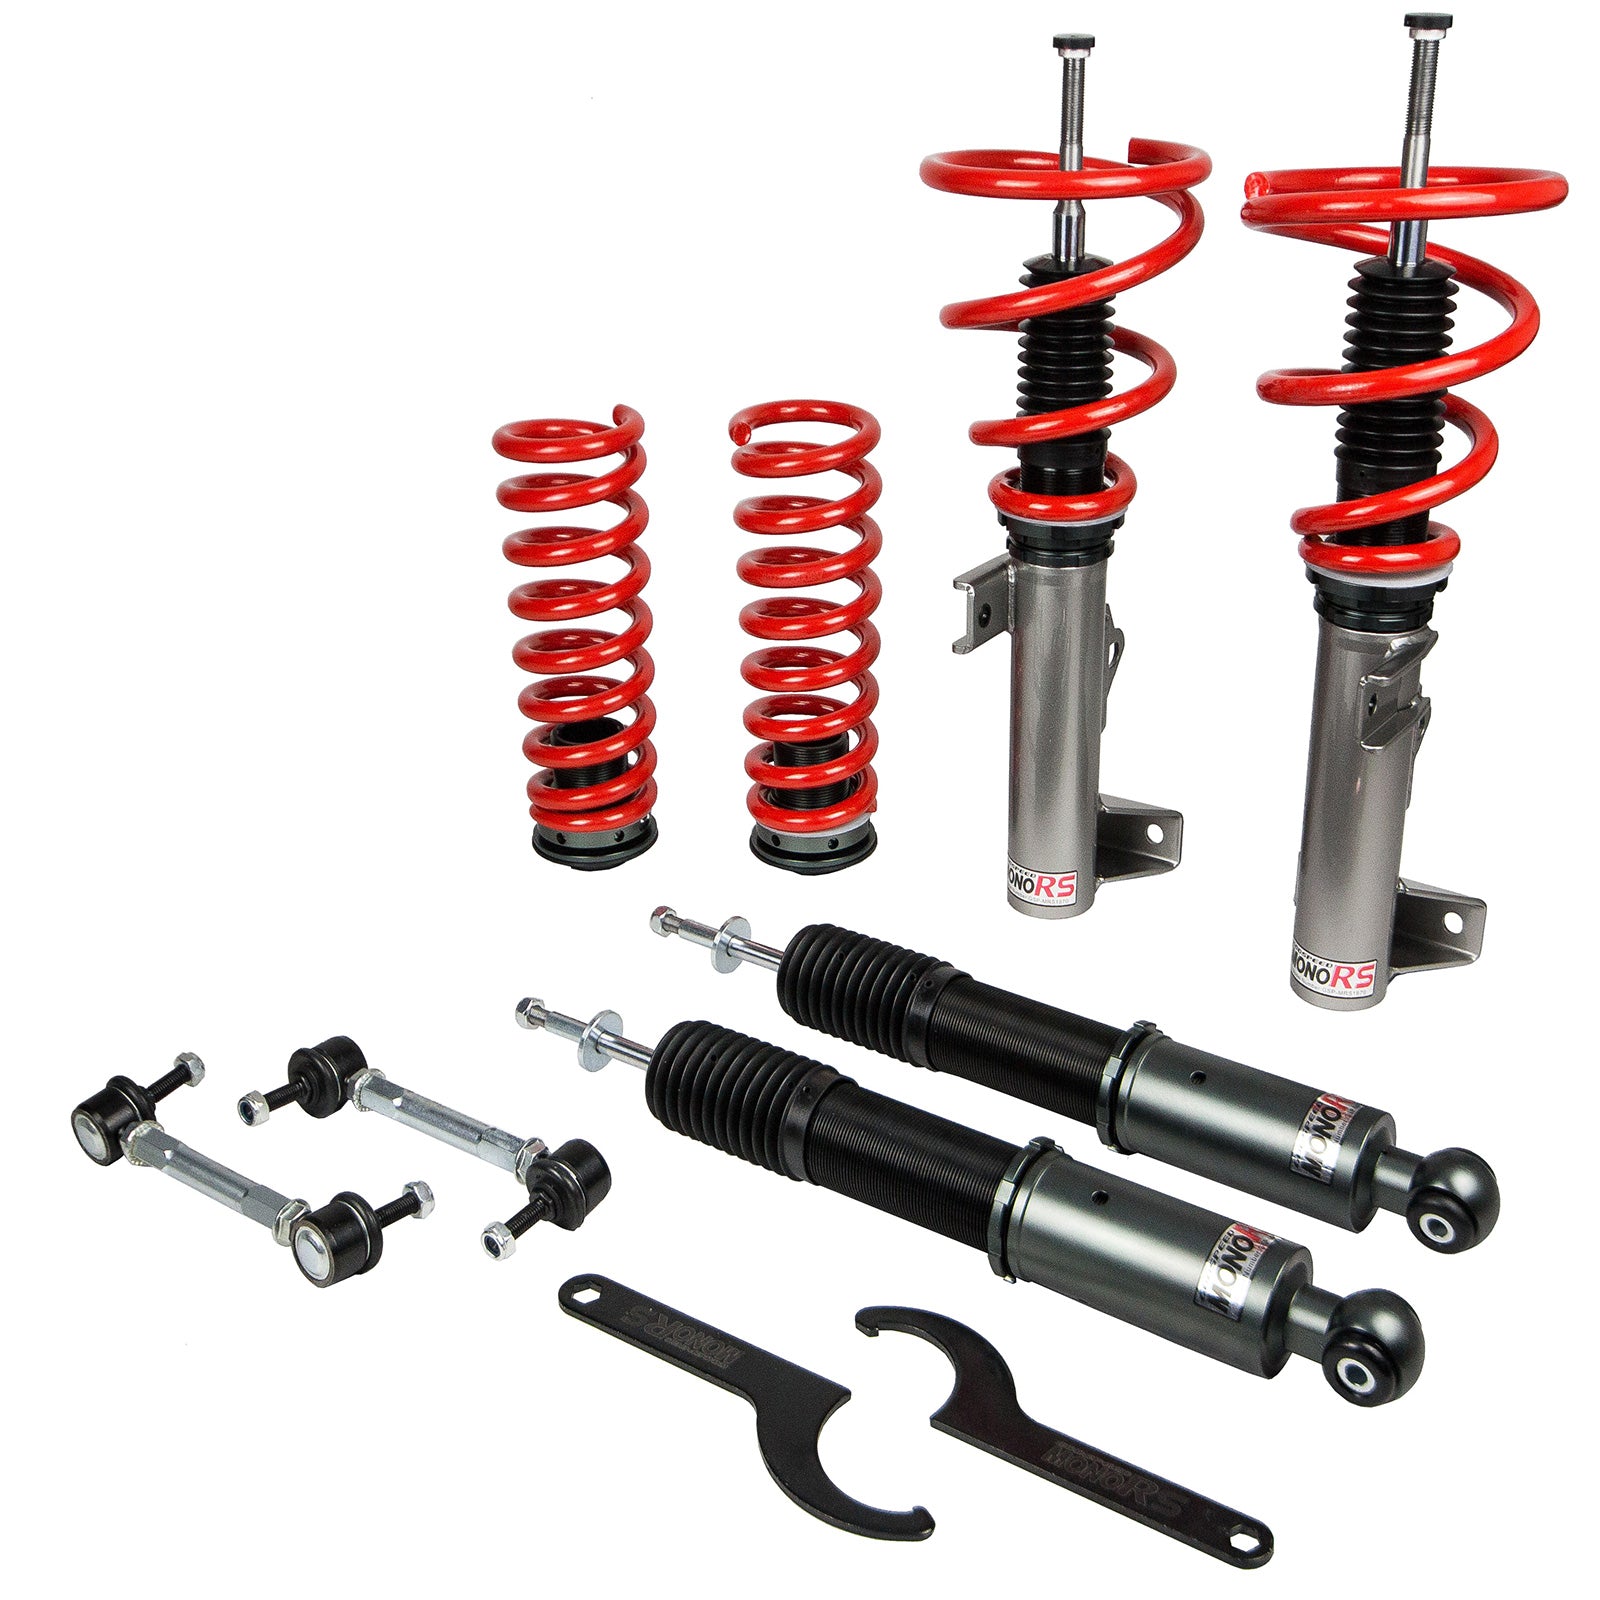 Godspeed MRS1870-A MonoRS Coilover Lowering Kit, 32 Damping Adjustment, Ride Height Adjustable